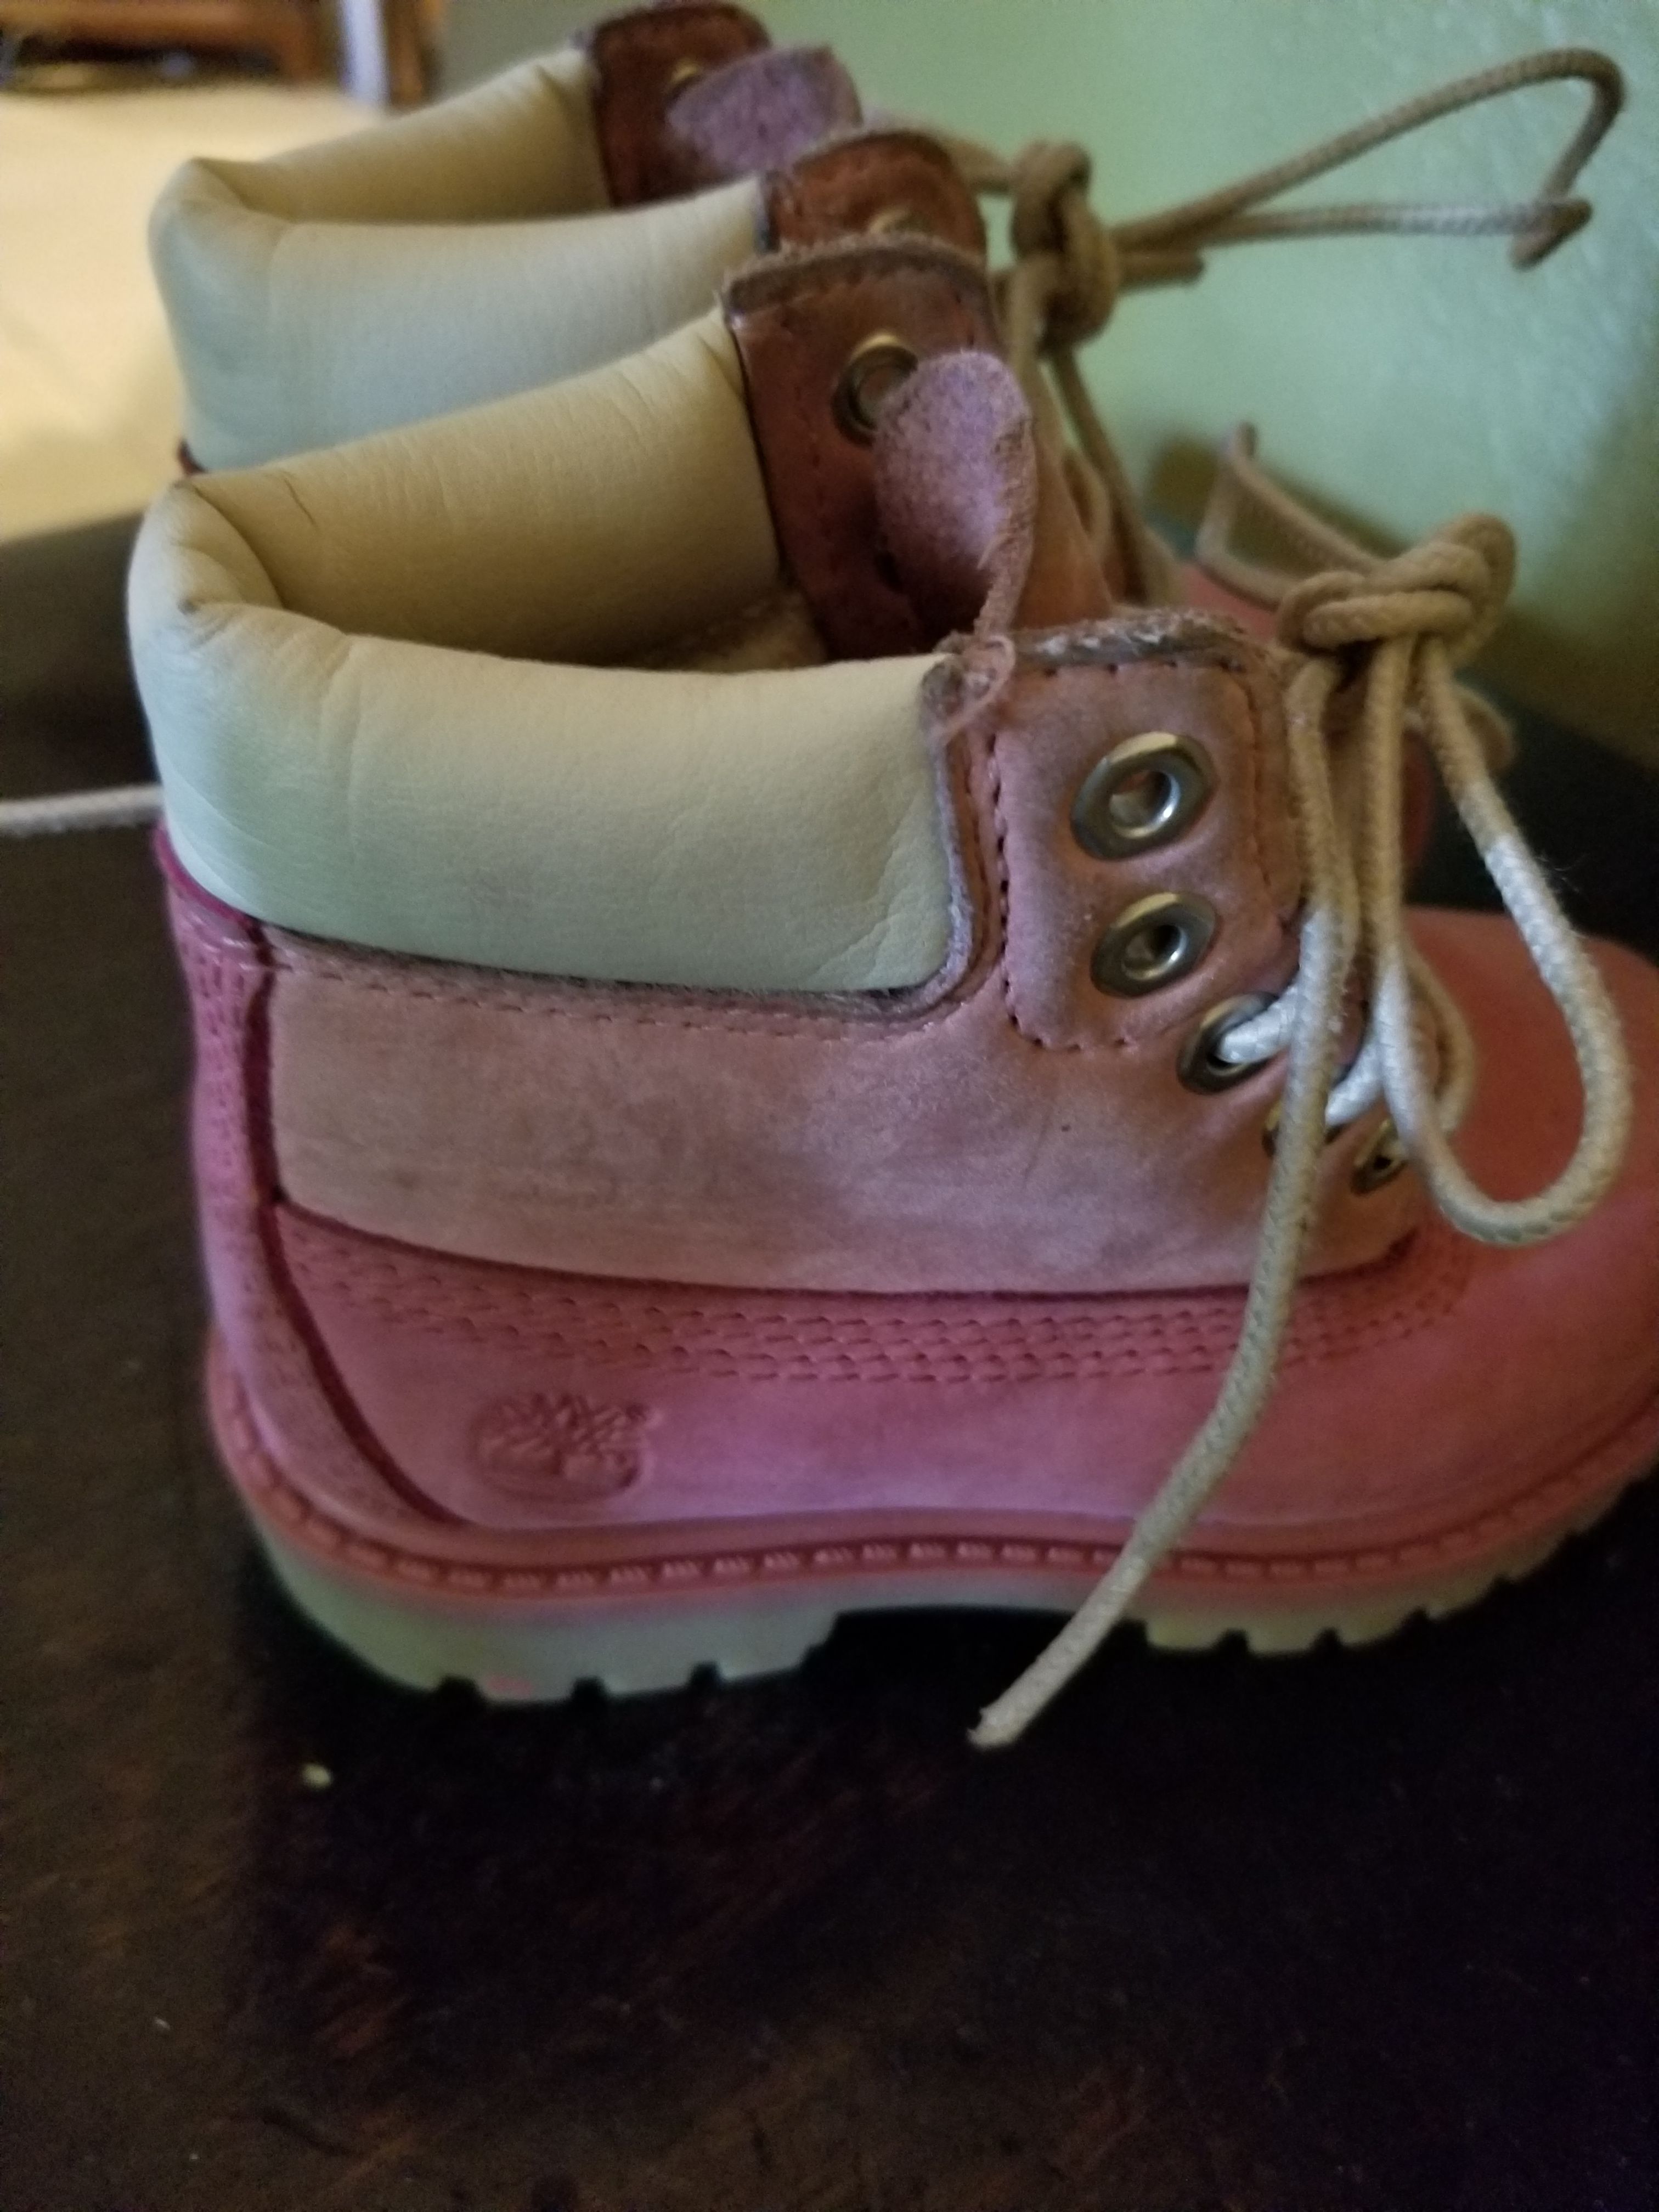 Timberland Toddler girls size 6 1/2 boots